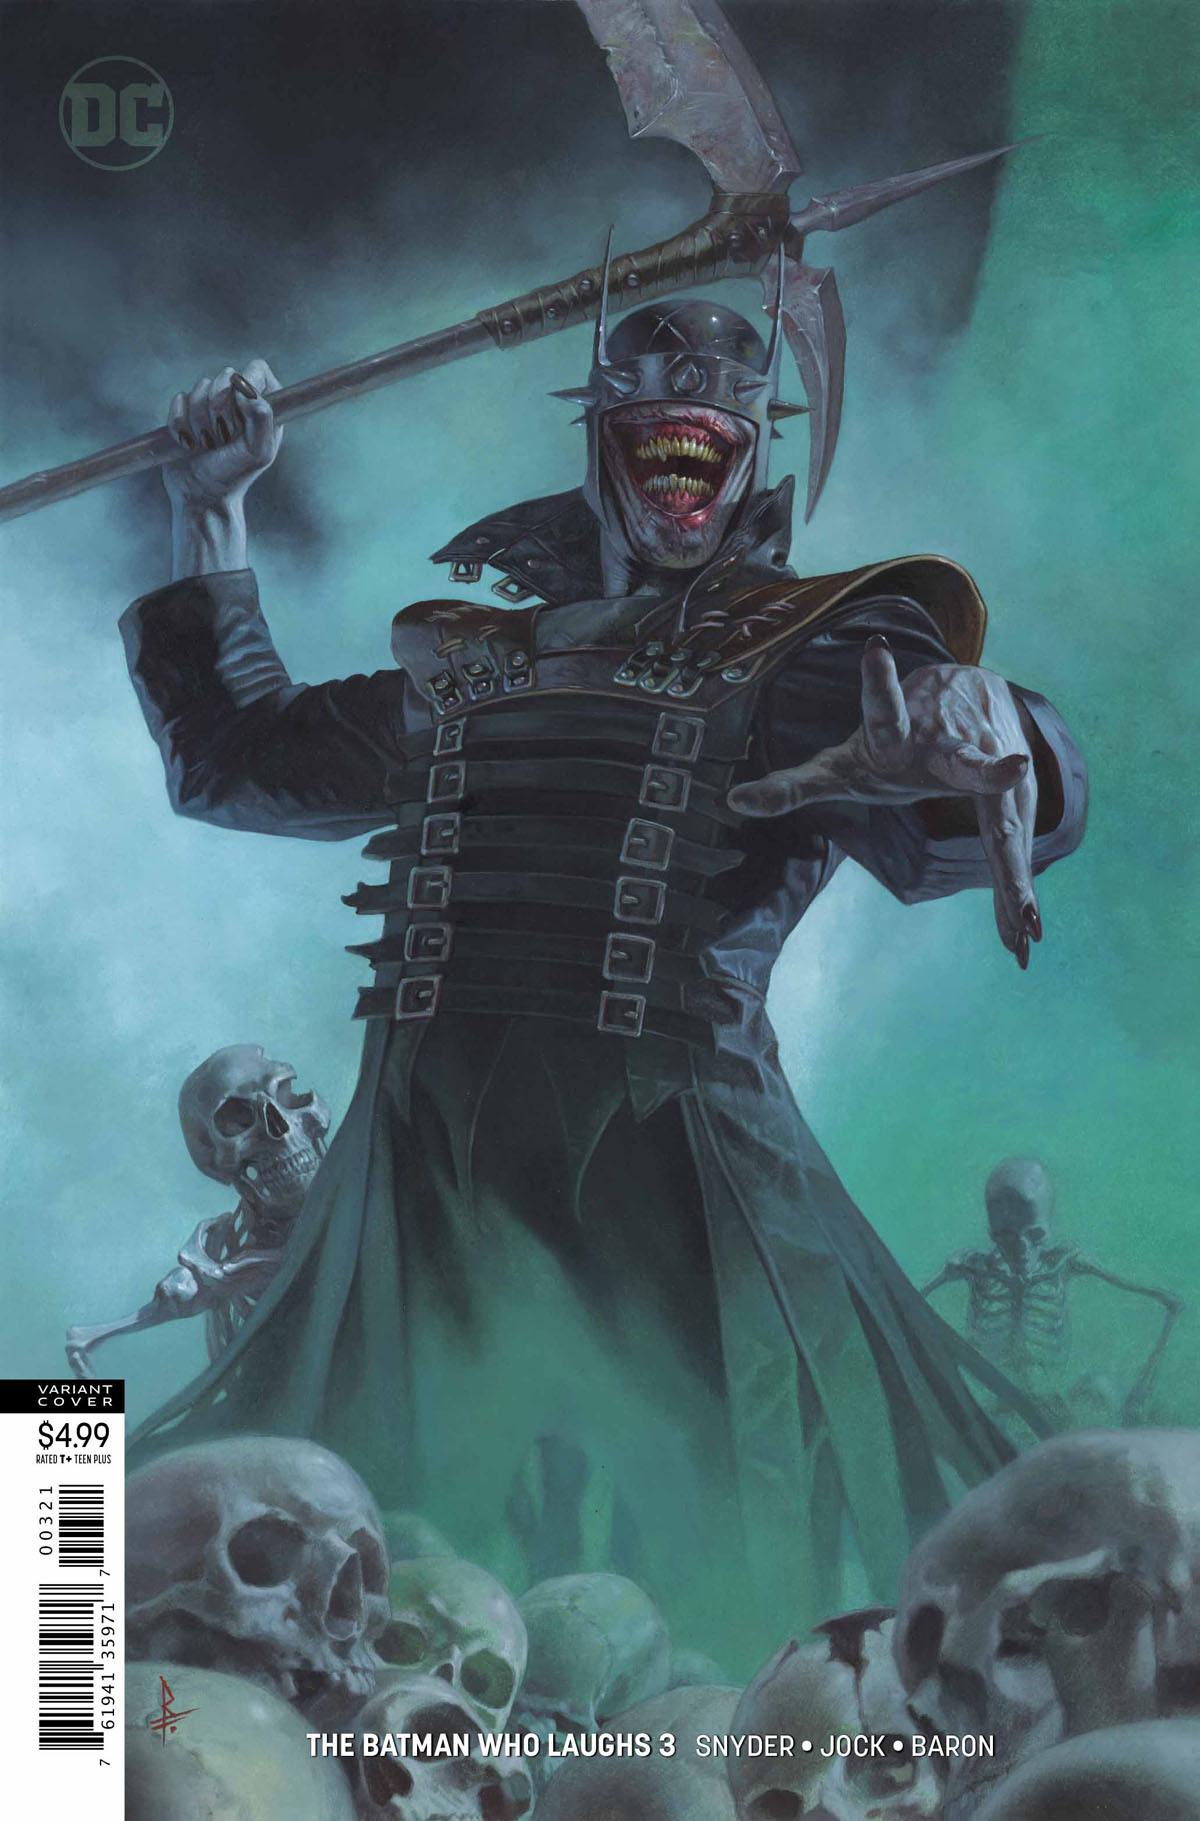 The Batman Who Laughs #3 variant cover